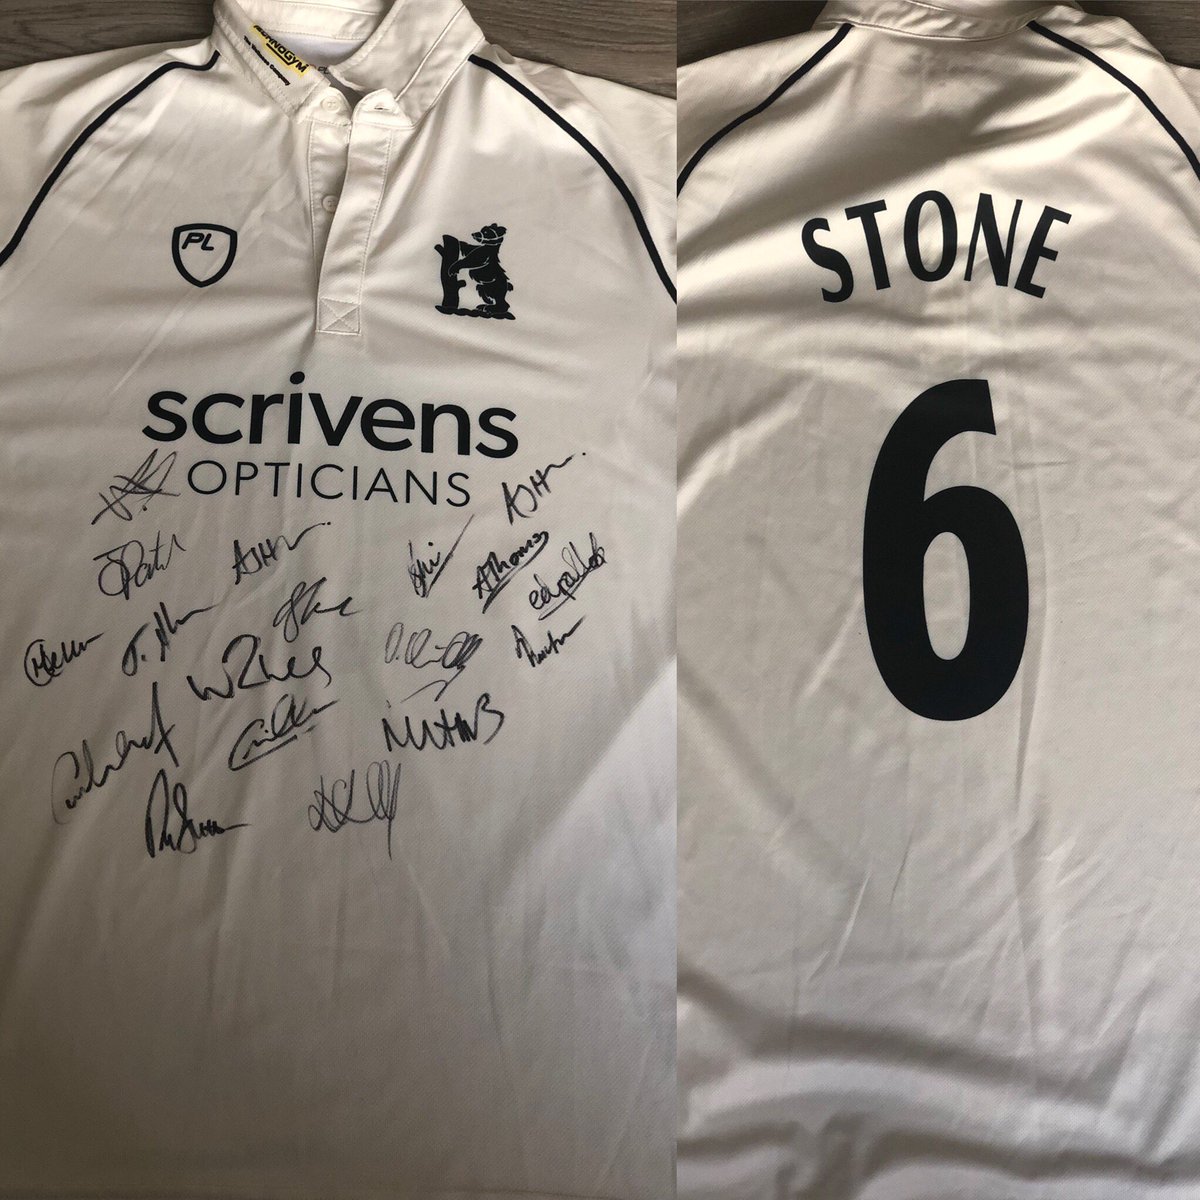 Thank you to @OllyStone2 who has kindly donated a signed @WarwickshireCCC shirt for our @CureLeukaemia Event on Saturday. This is the second time Olly has supported our events which is very much appreciated. #CLfamily #charity #auction #makeadifference